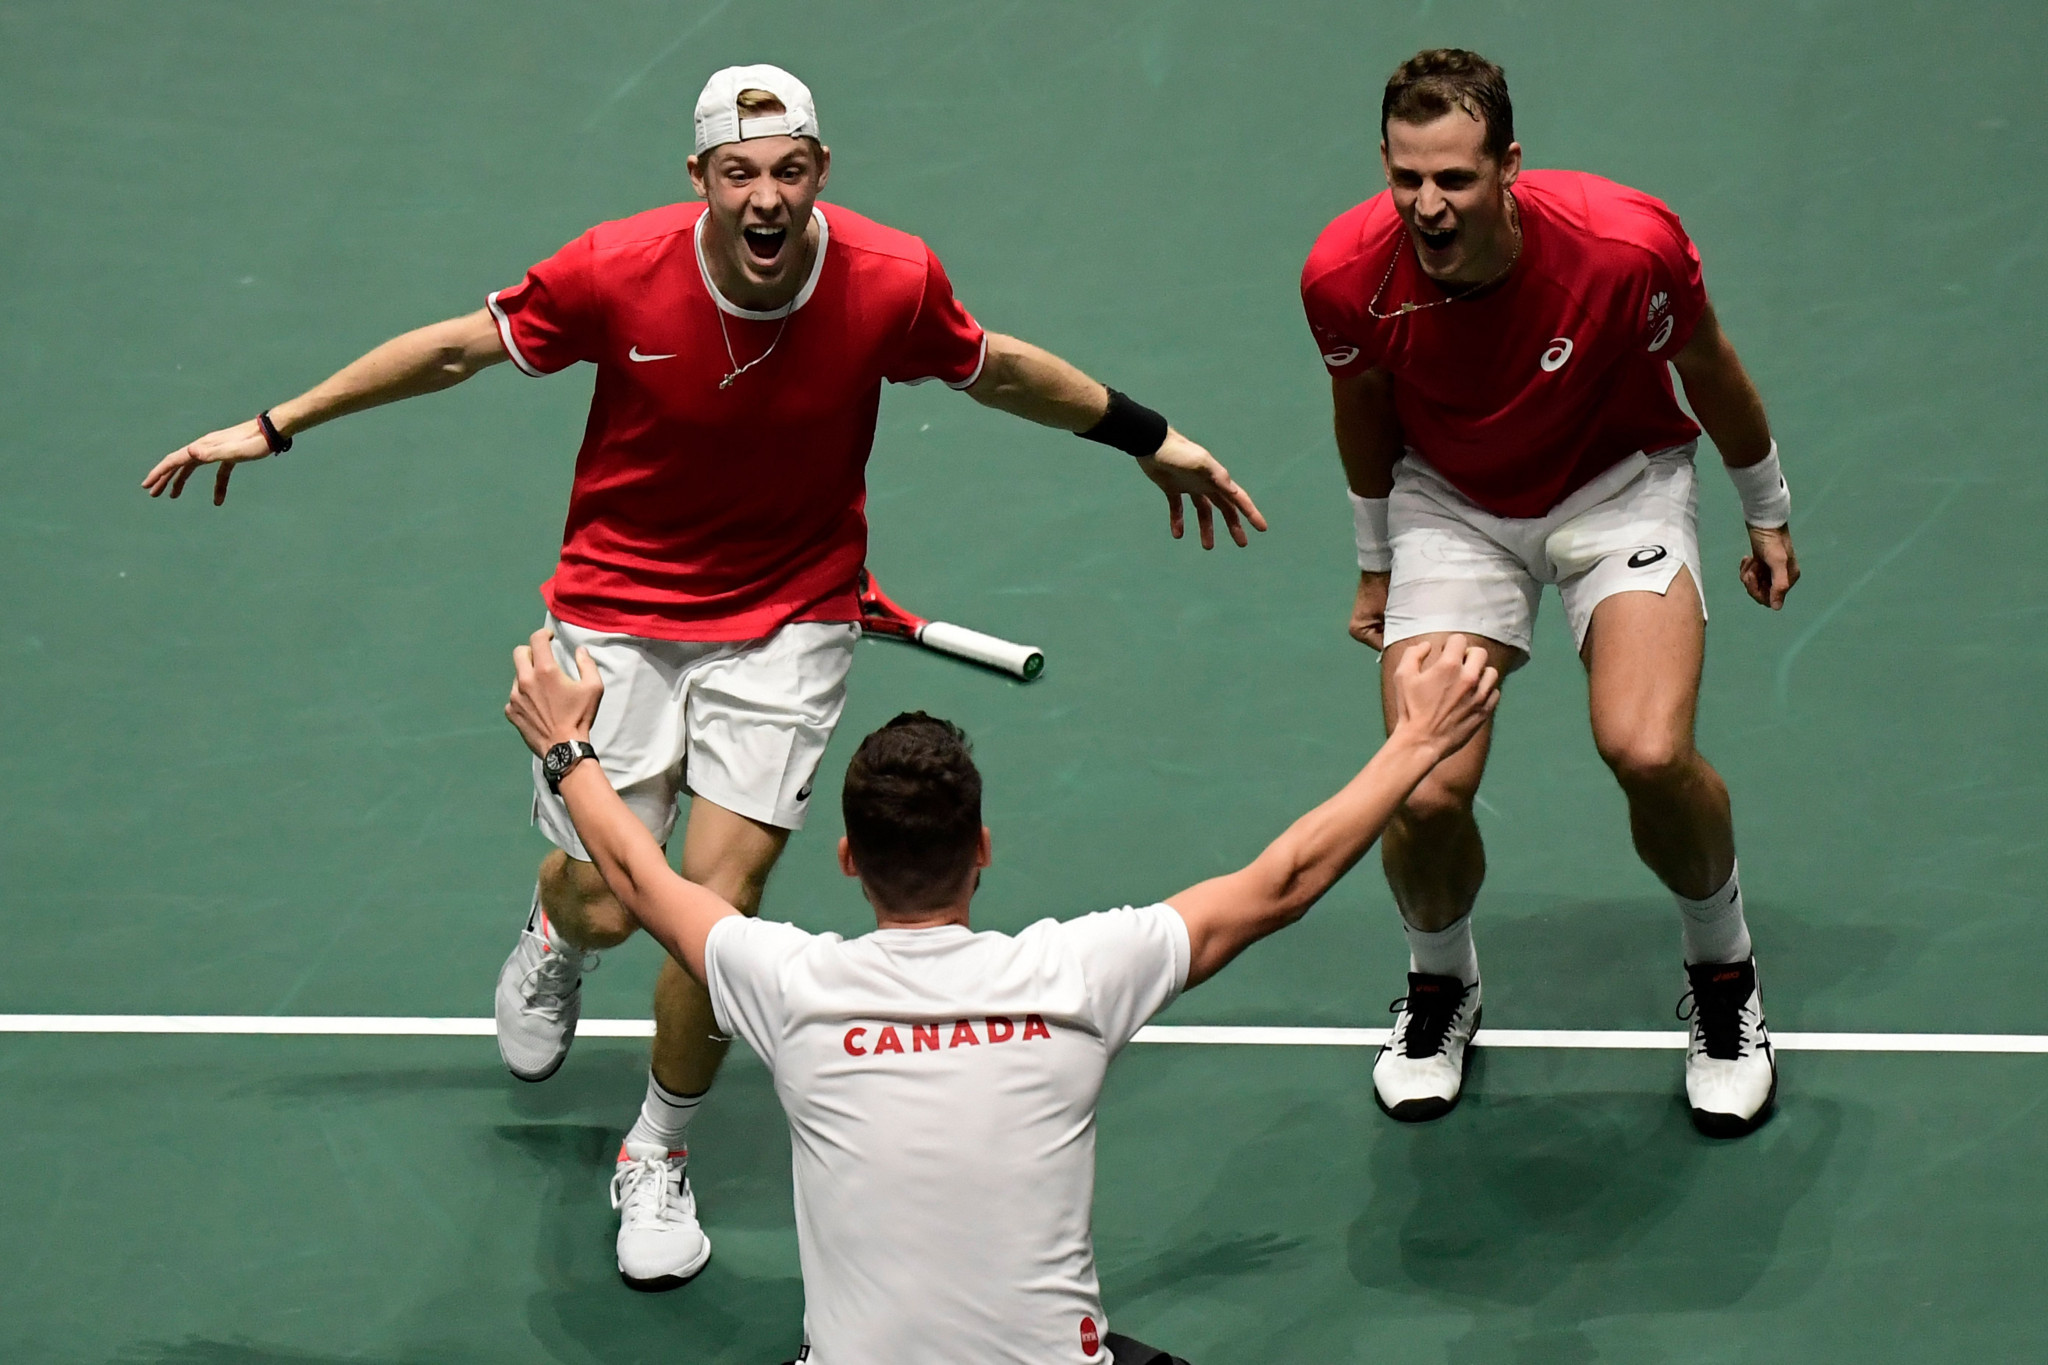 Canada clinch place in last four at Davis Cup Finals